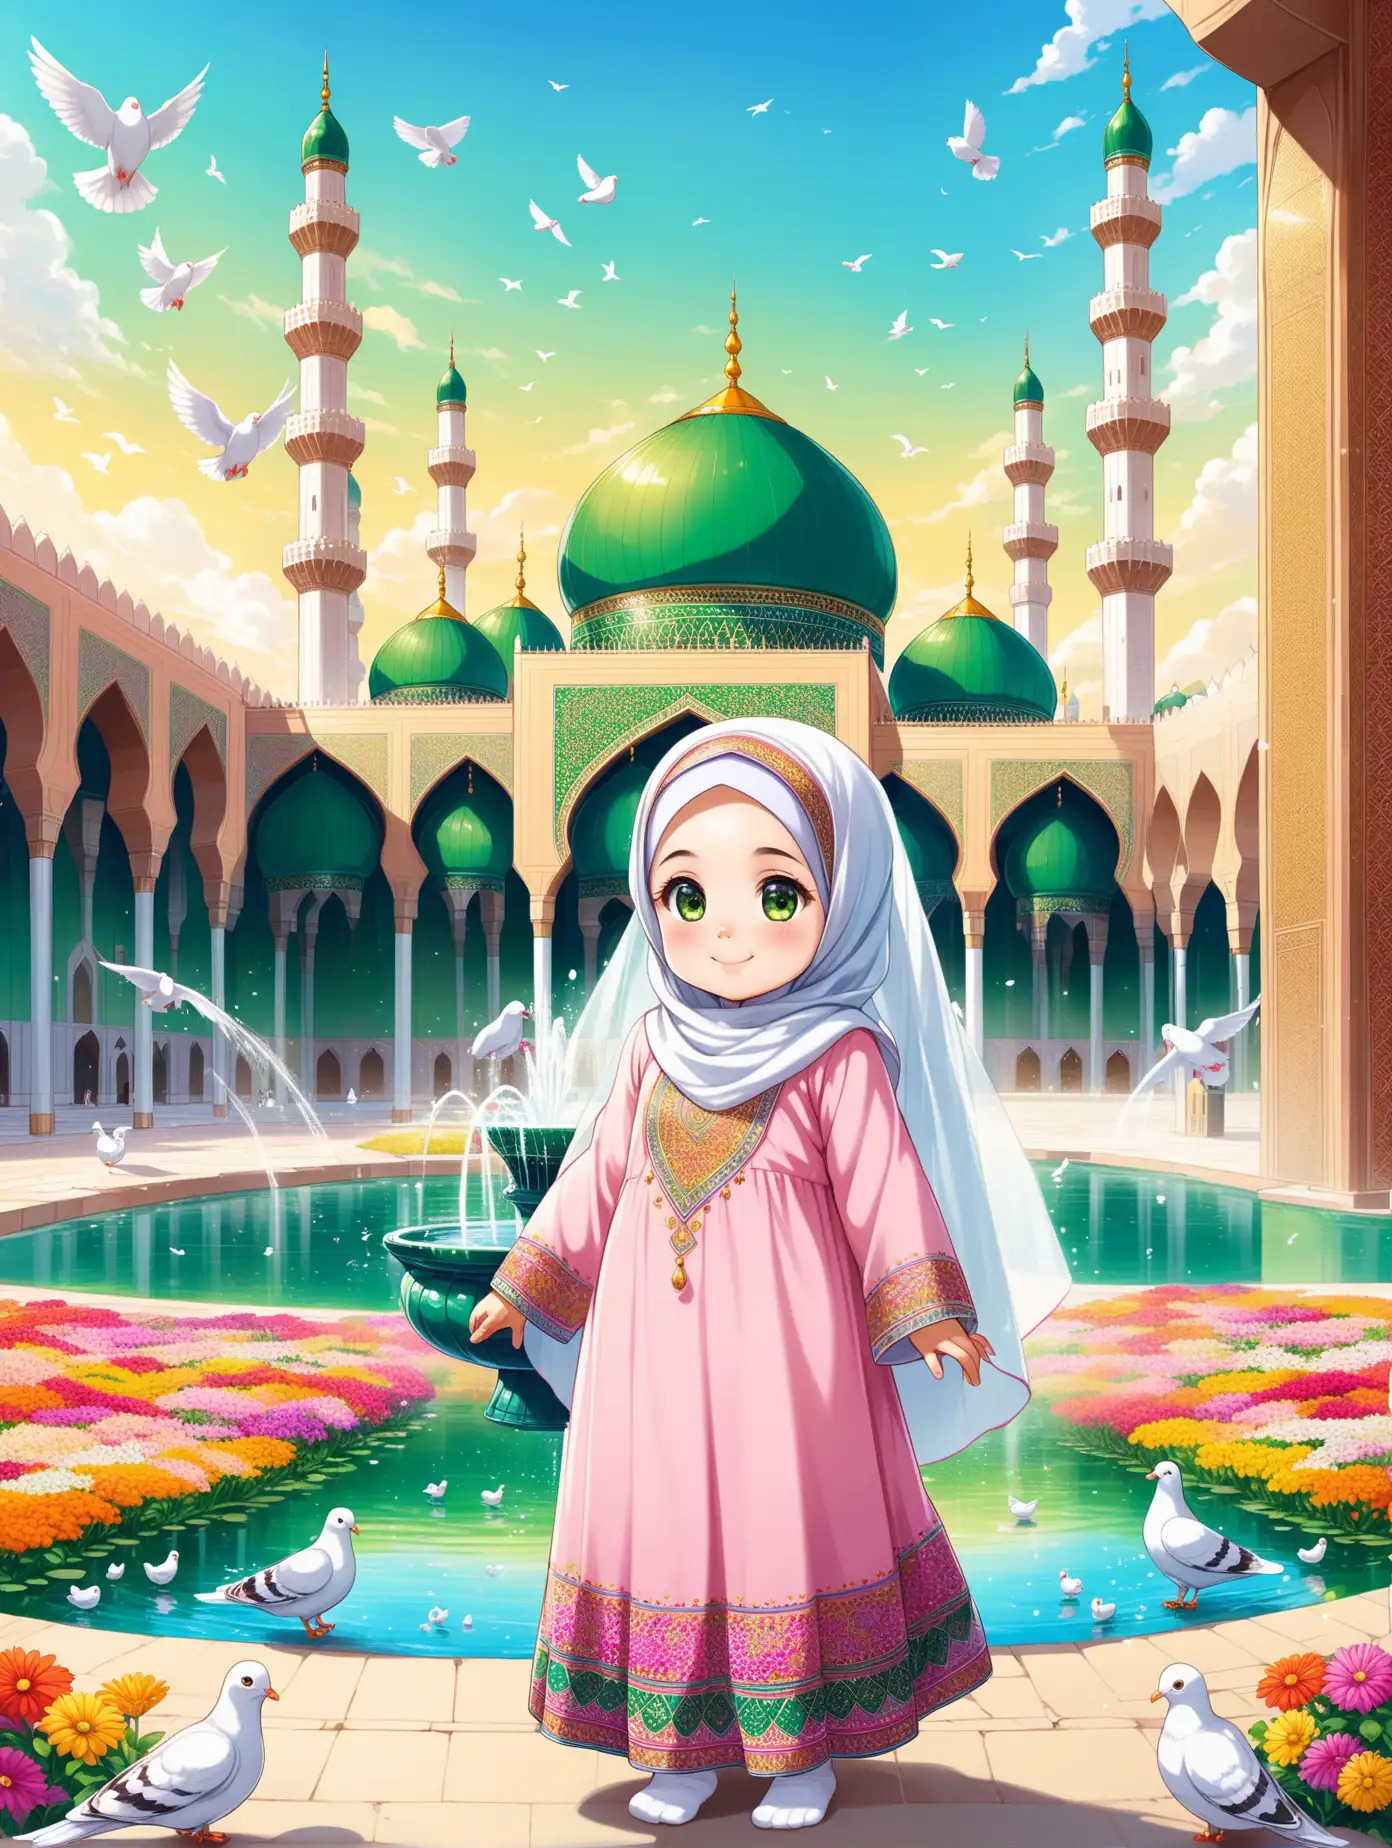 Character Persian little girl(full height, proudly, Muslim, baby face, with emphasis no hair out of veil(Hijab), smaller eyes, bigger nose, white skin, cute, smiling, wearing socks, clothes full of Persian designs).

Atmosphere beautiful Jamkaran mosque, yard, green dome, colorful flowers, pond with water fountain, many pigeons, nobody.